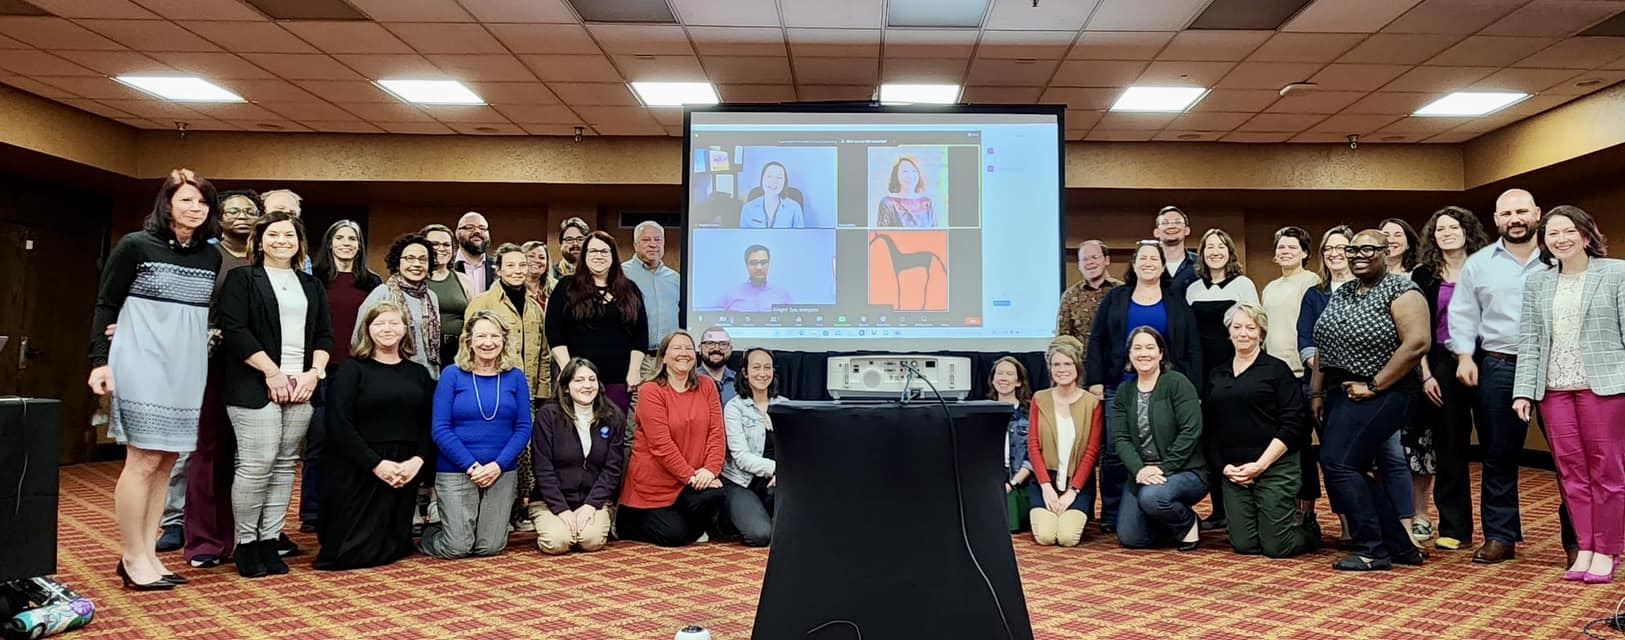 the SEMC2023 Program Committee meets both in person and on Zoom in Louisville, Kentucky. All the people pictured are smiling at the camera, and a screen showing the virtual attendees is pictured in the middle of the group.